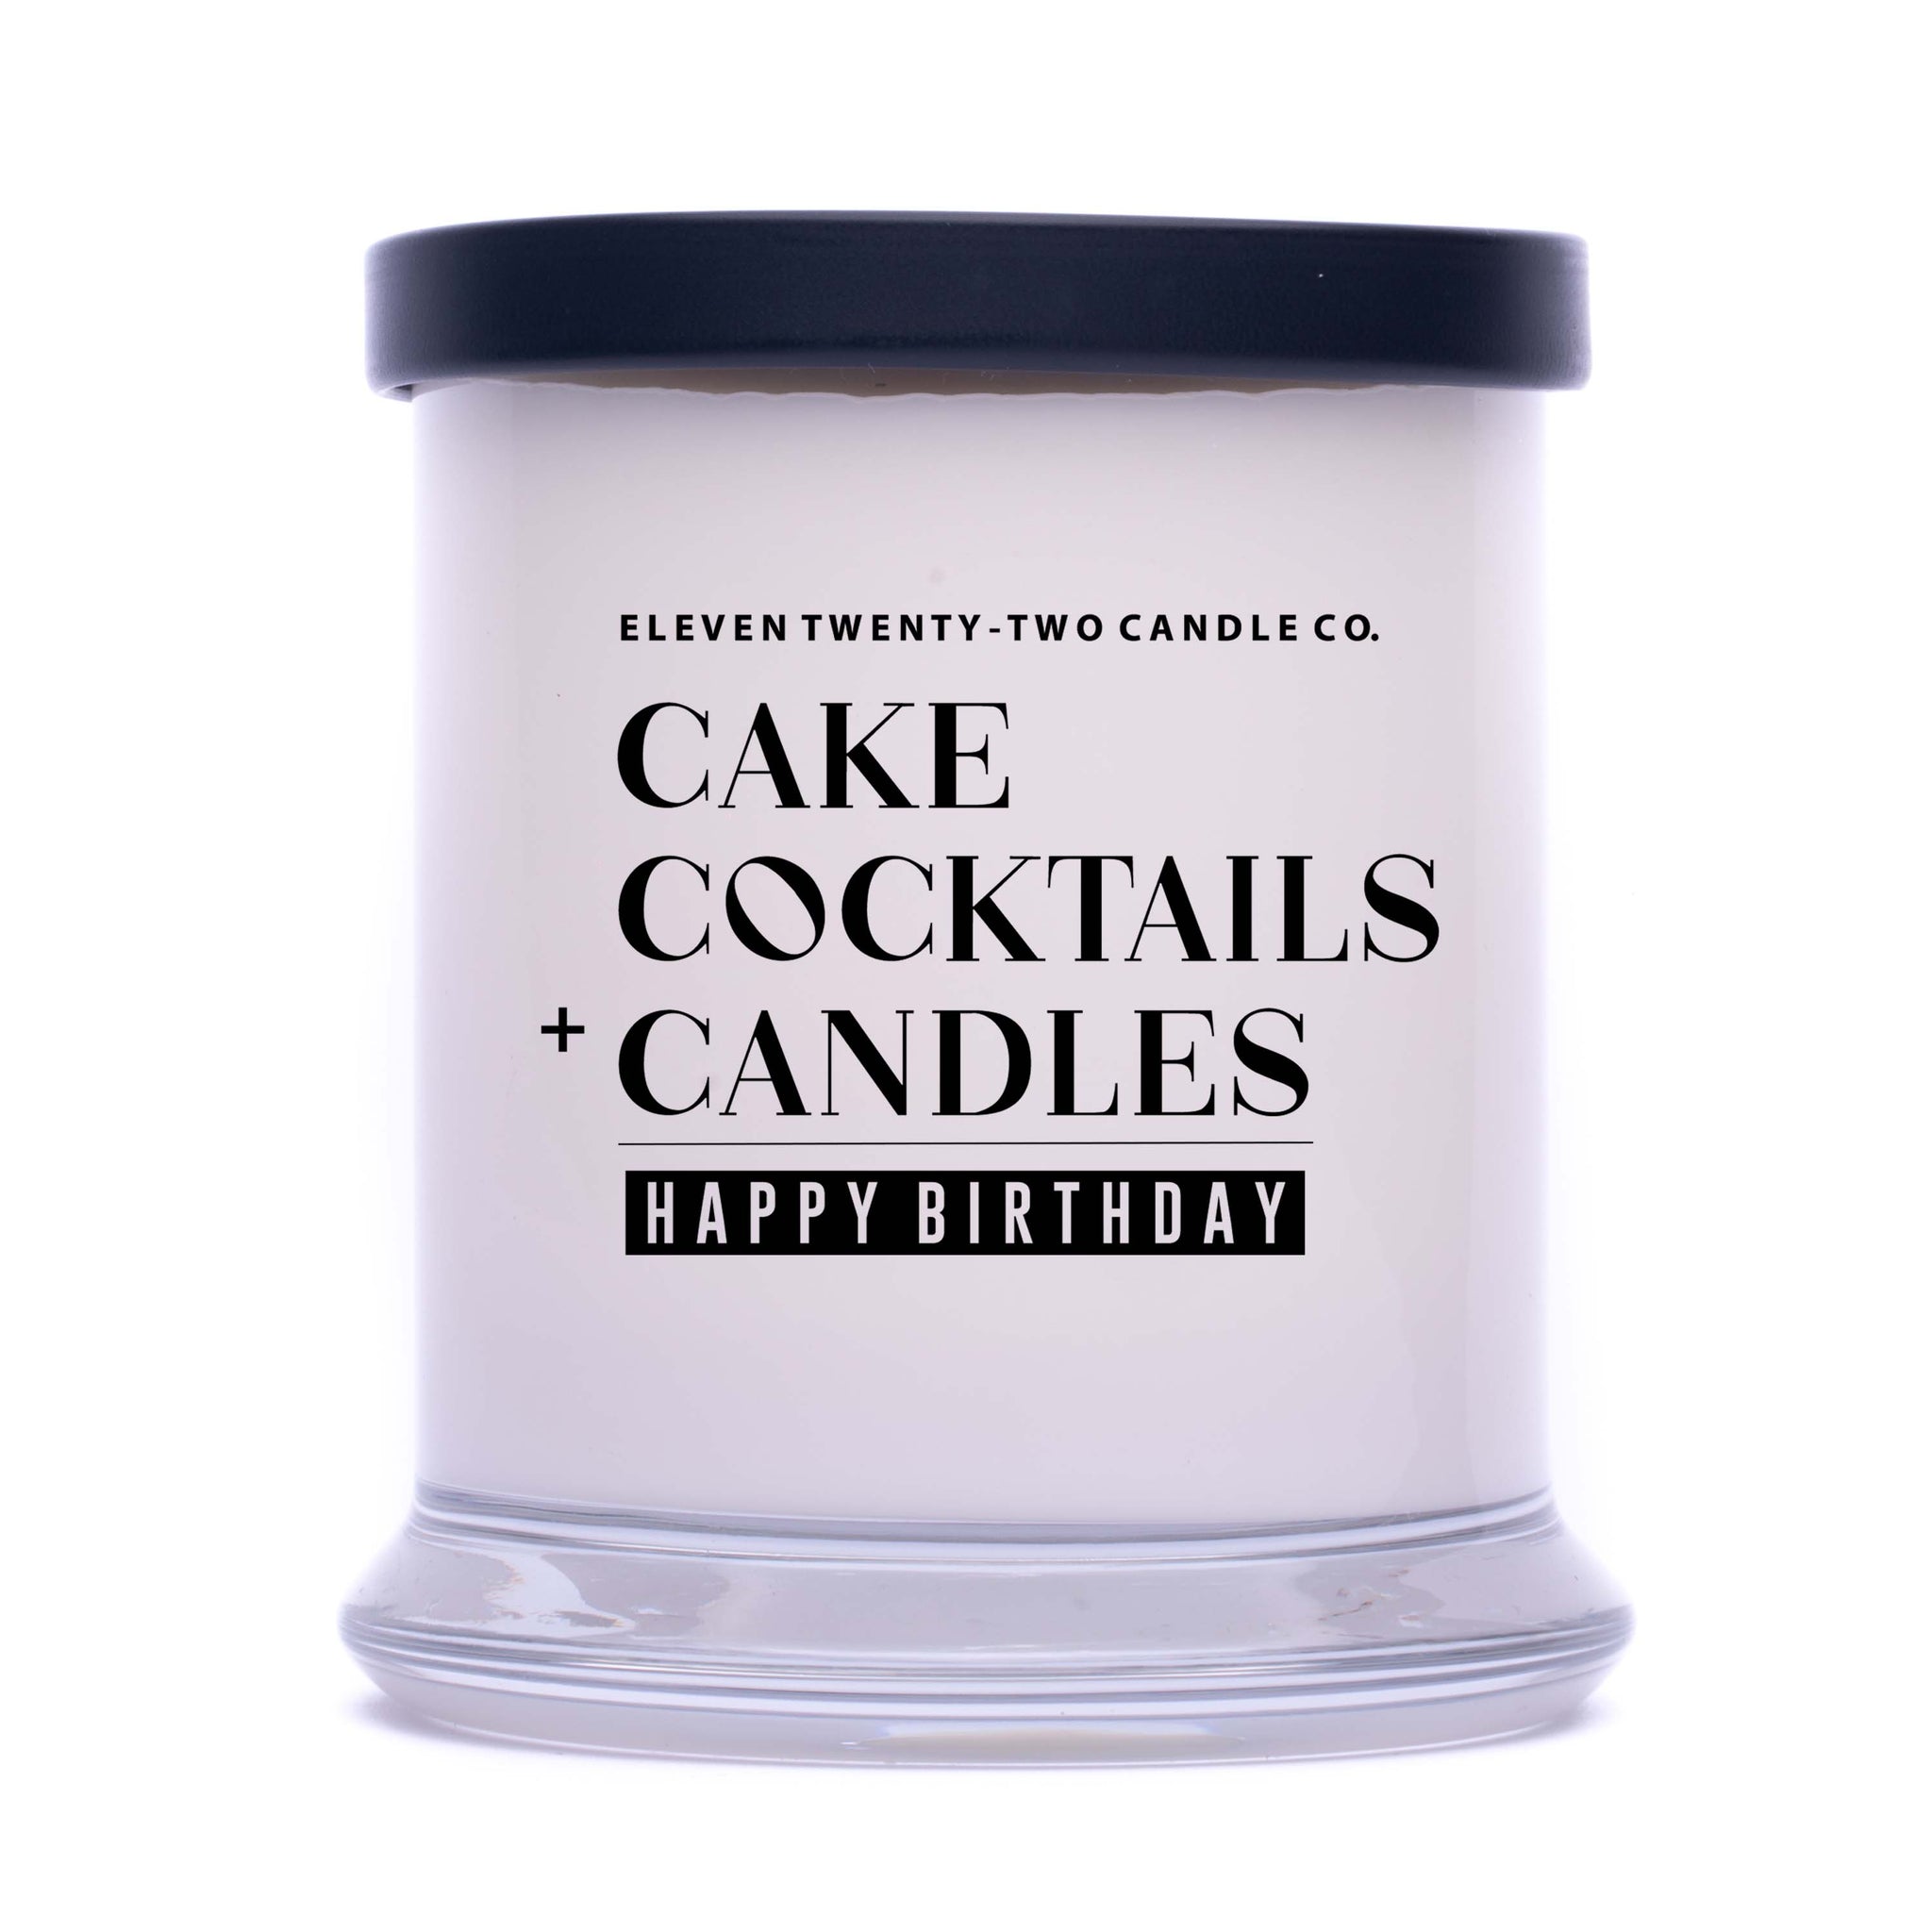 CAKES COCKTAILS & CANDLES